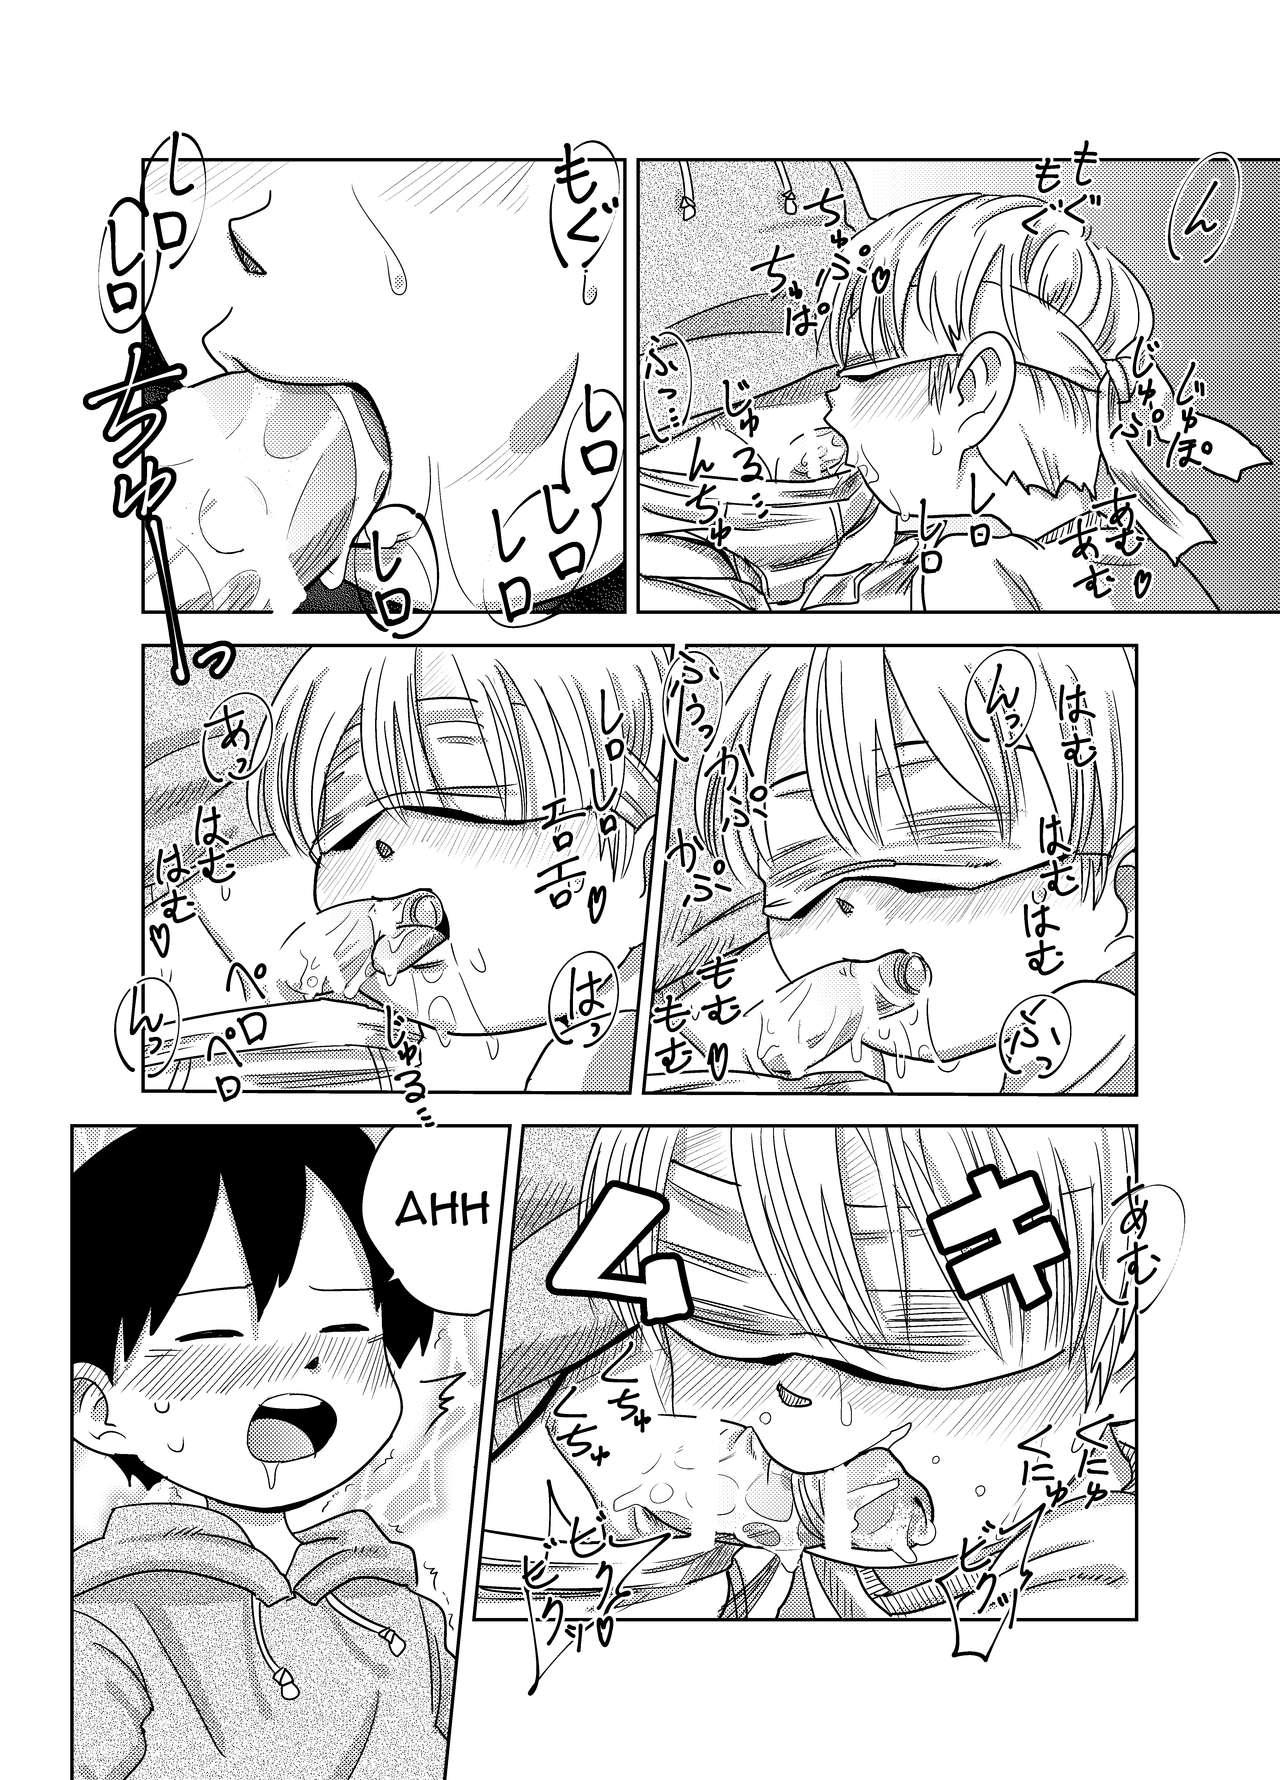 Deflowered Herachiozukushi | All Kinds of Blowjobs - Original Strapon - Page 11